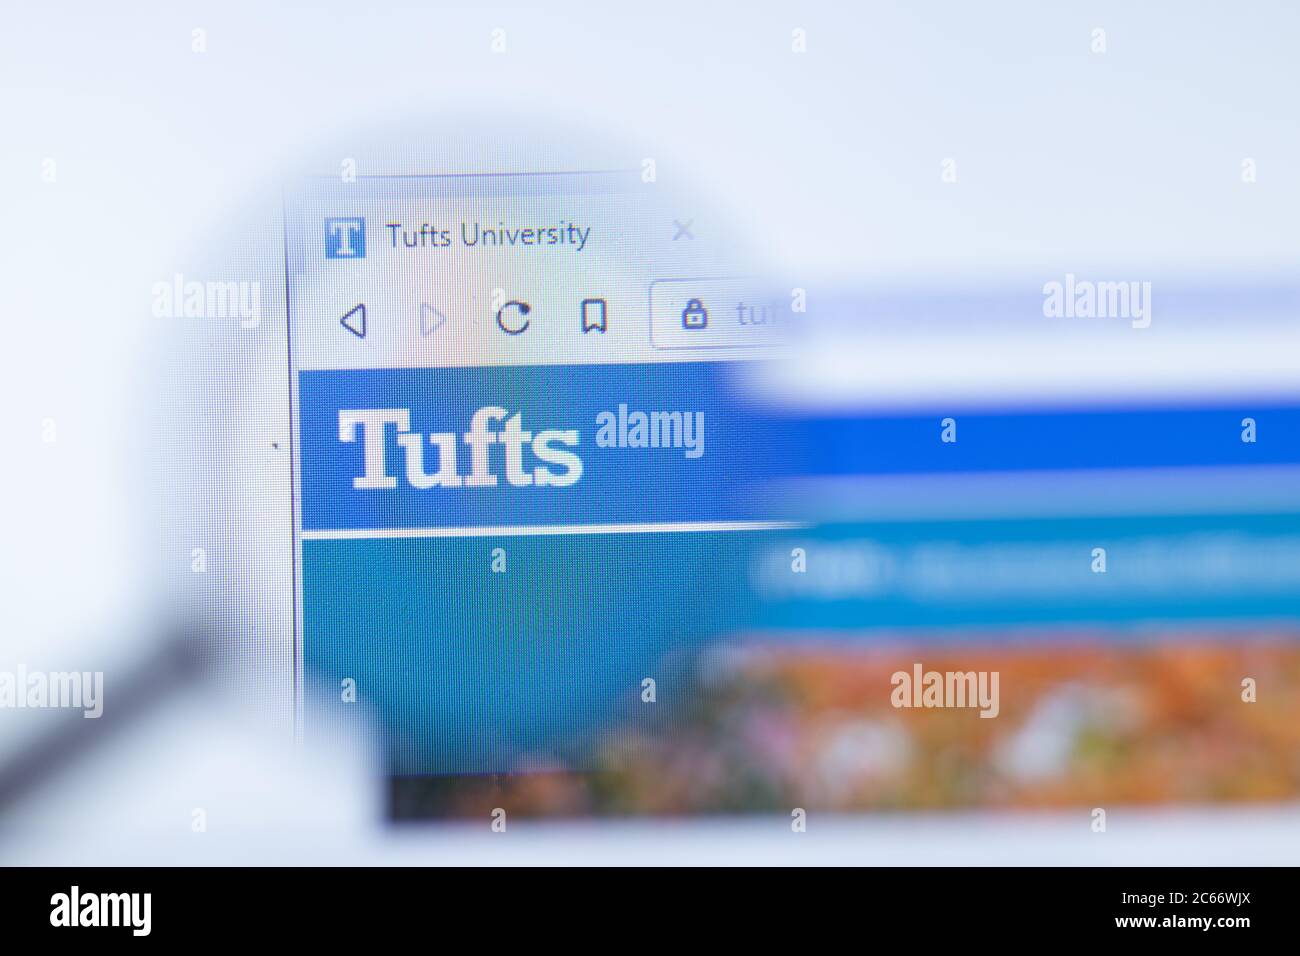 Moscow, Russia - 1 June 2020: Tufts University website with logo, Illustrative Editorial Stock Photo